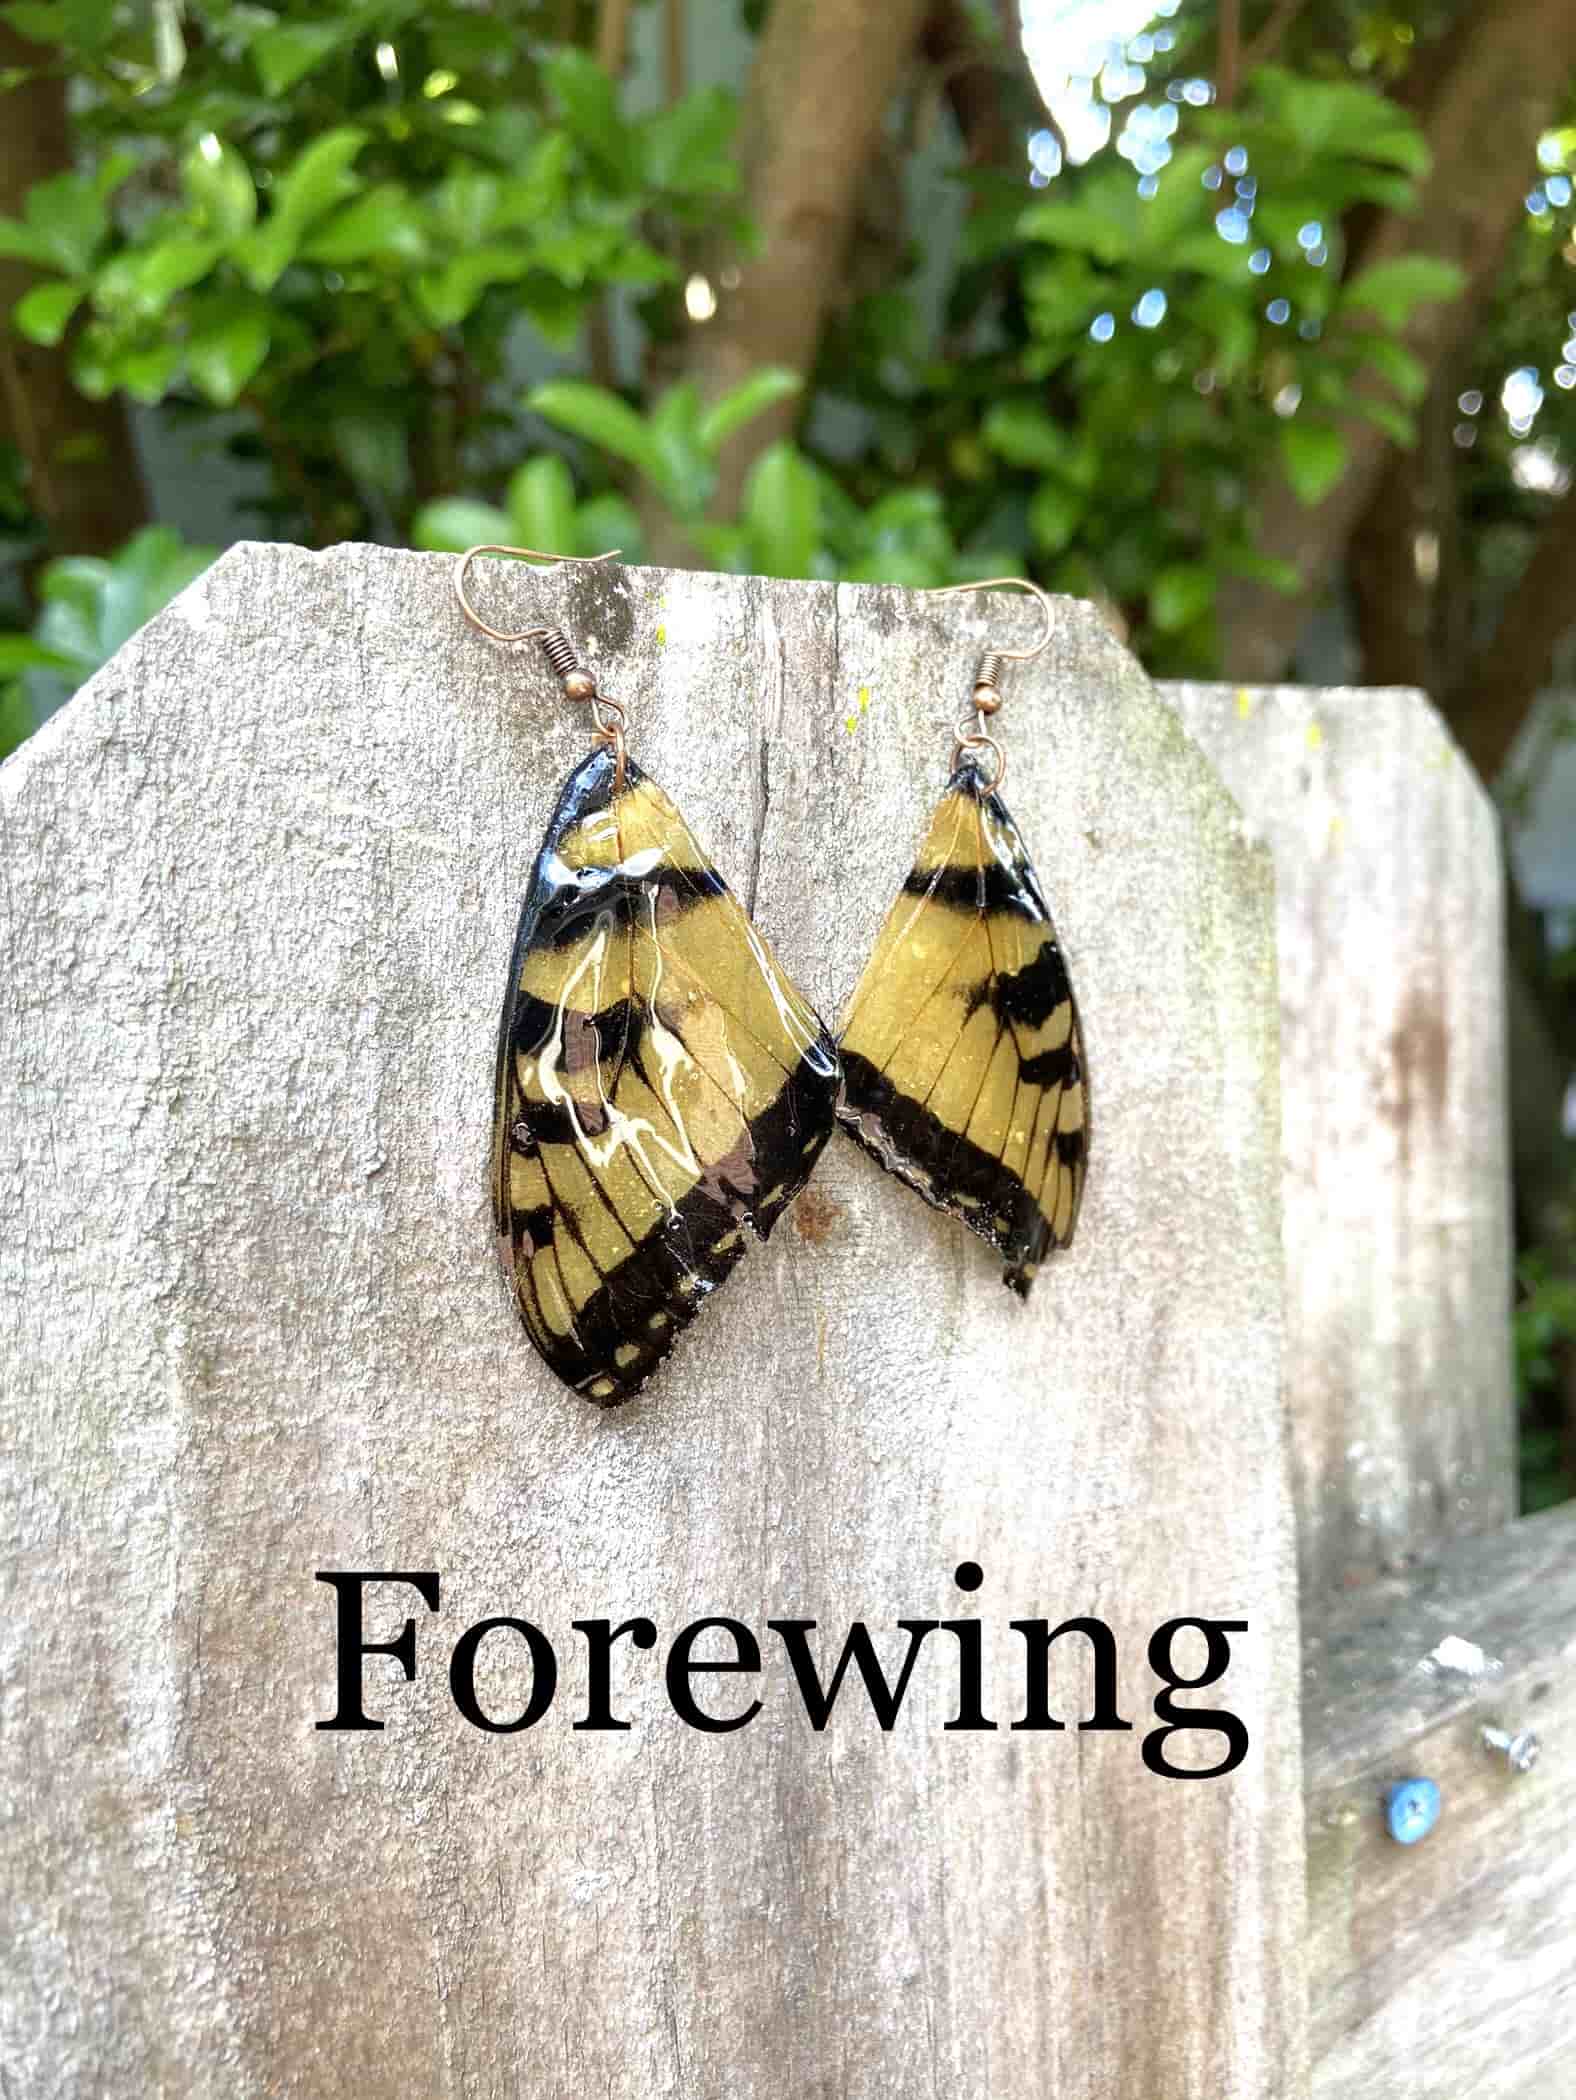 Made from wild harvested Eastern Tiger Swallowtail forewing wings coated in resin, each earring is one-of-a-kind. 100% copper jewelry.